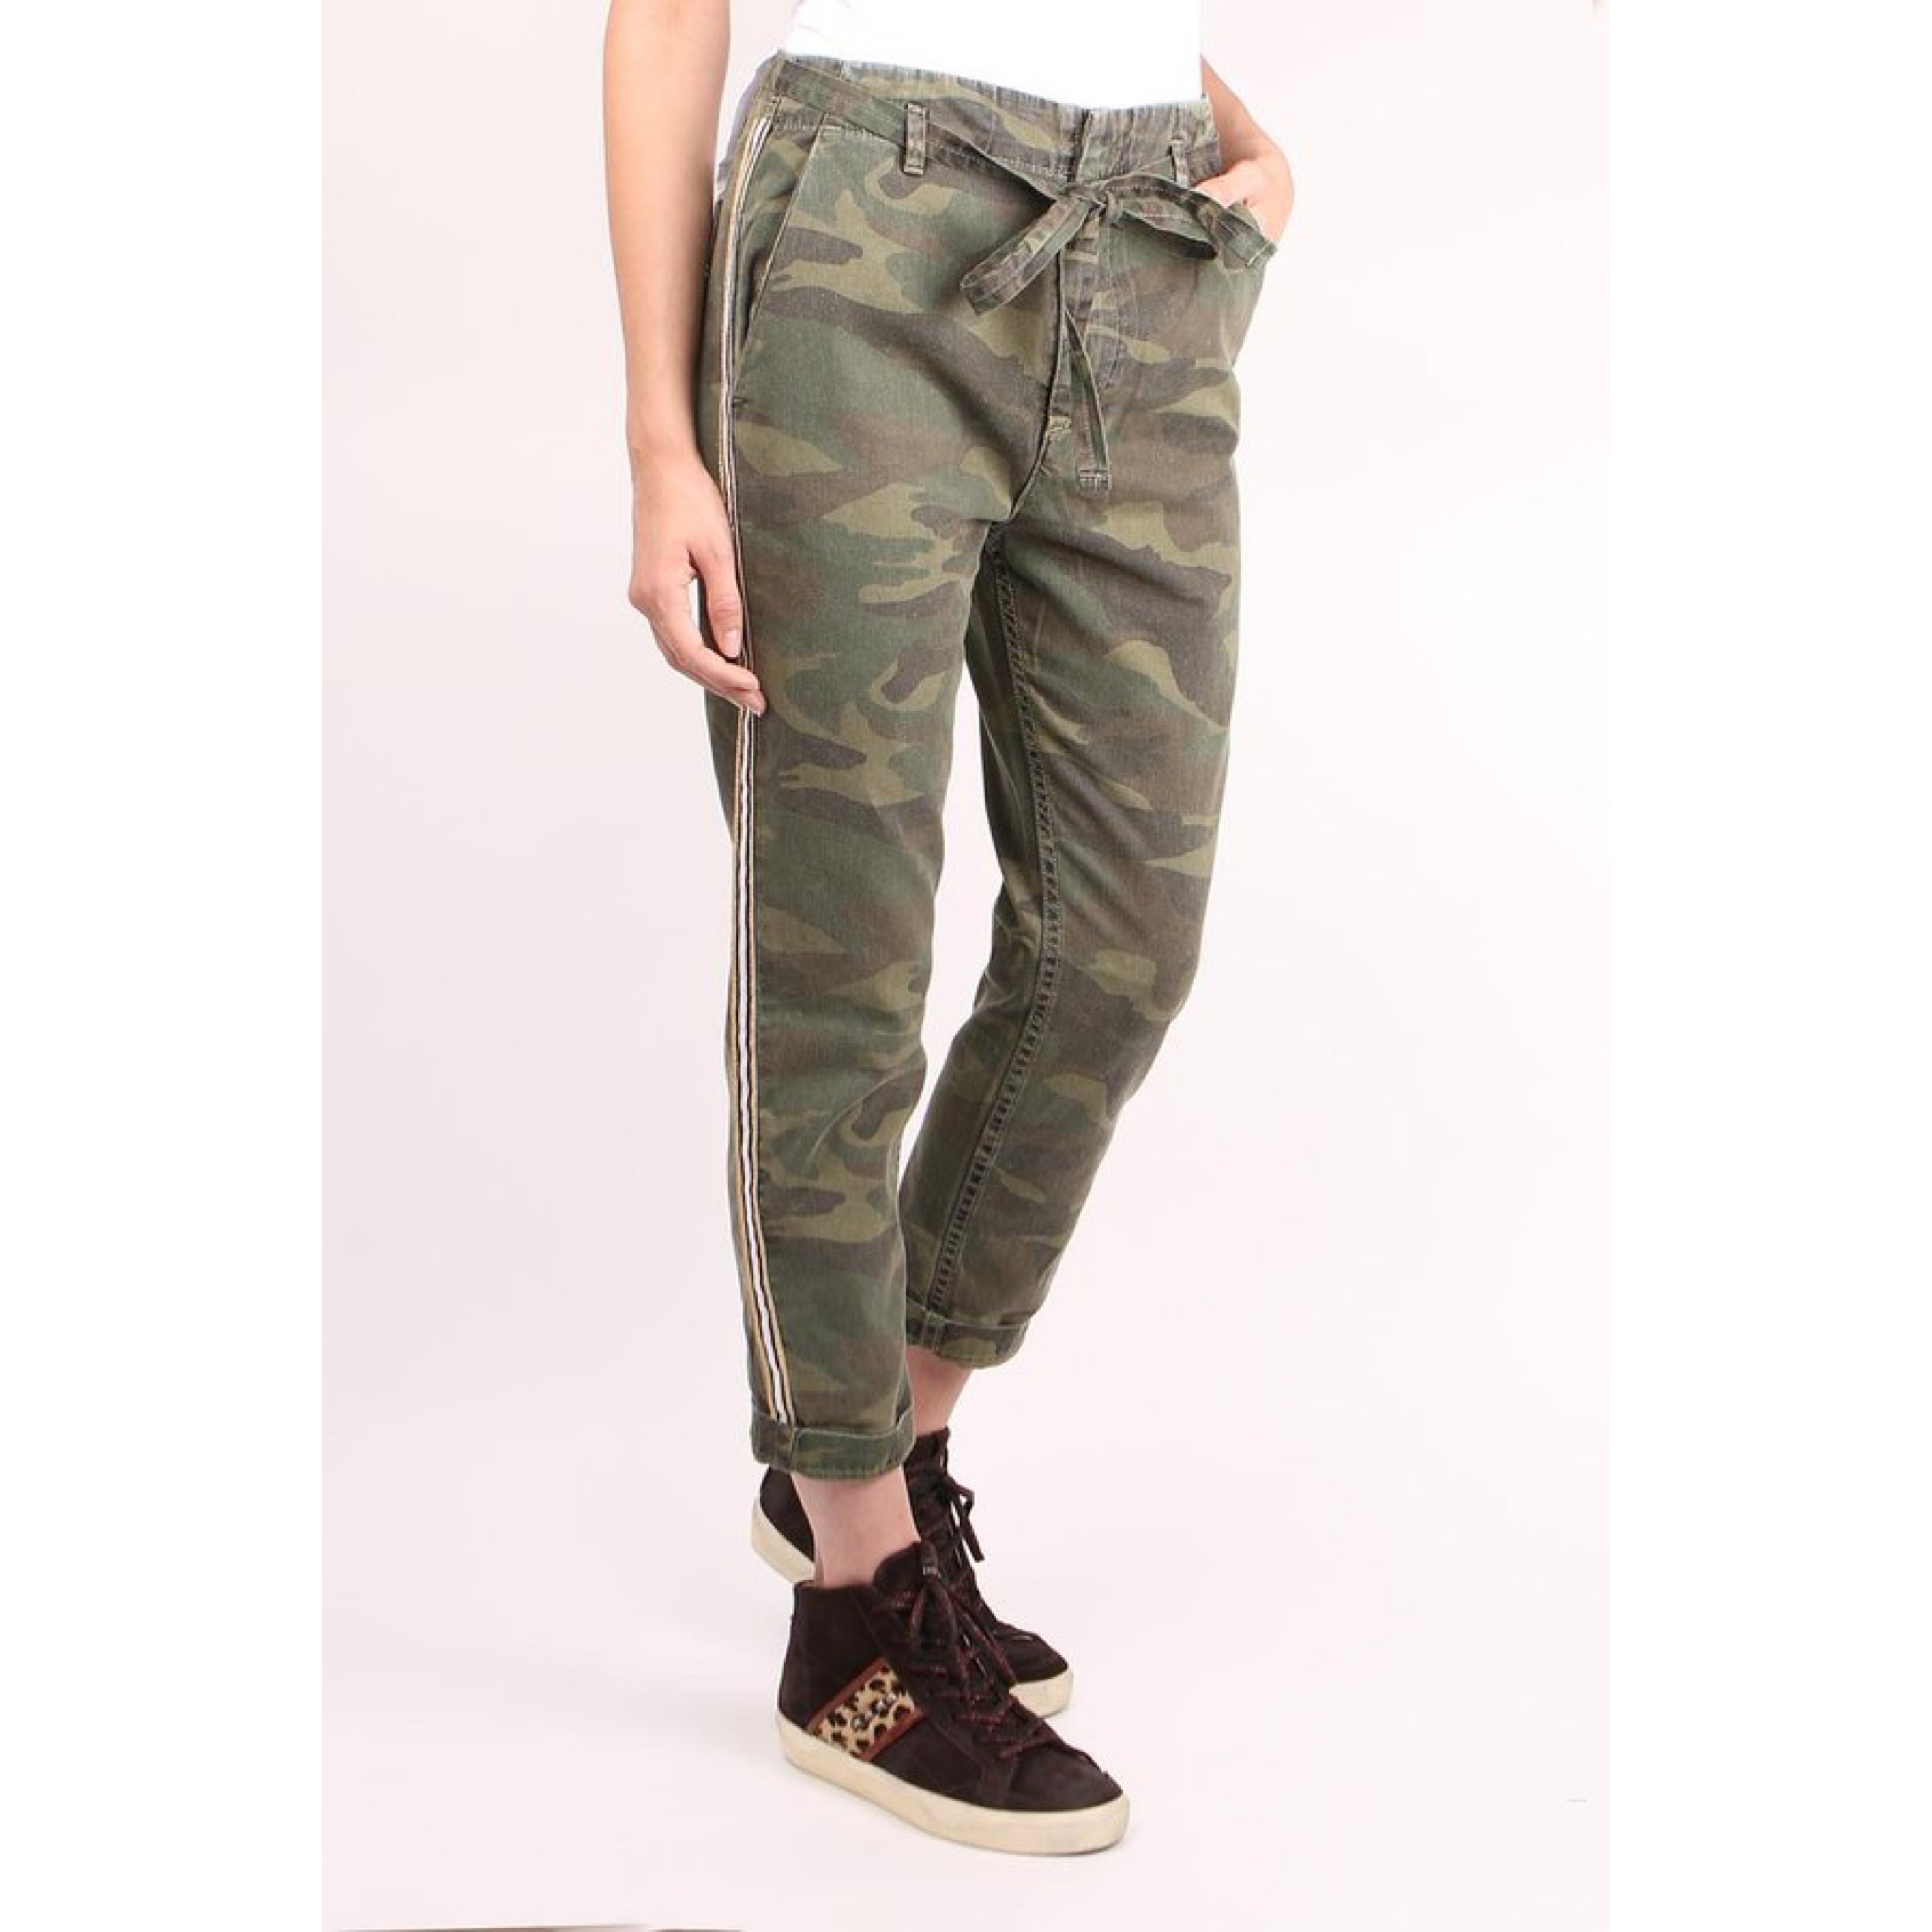 Sundry camo l'automme pants, size 27, NEW WITH TAGS!